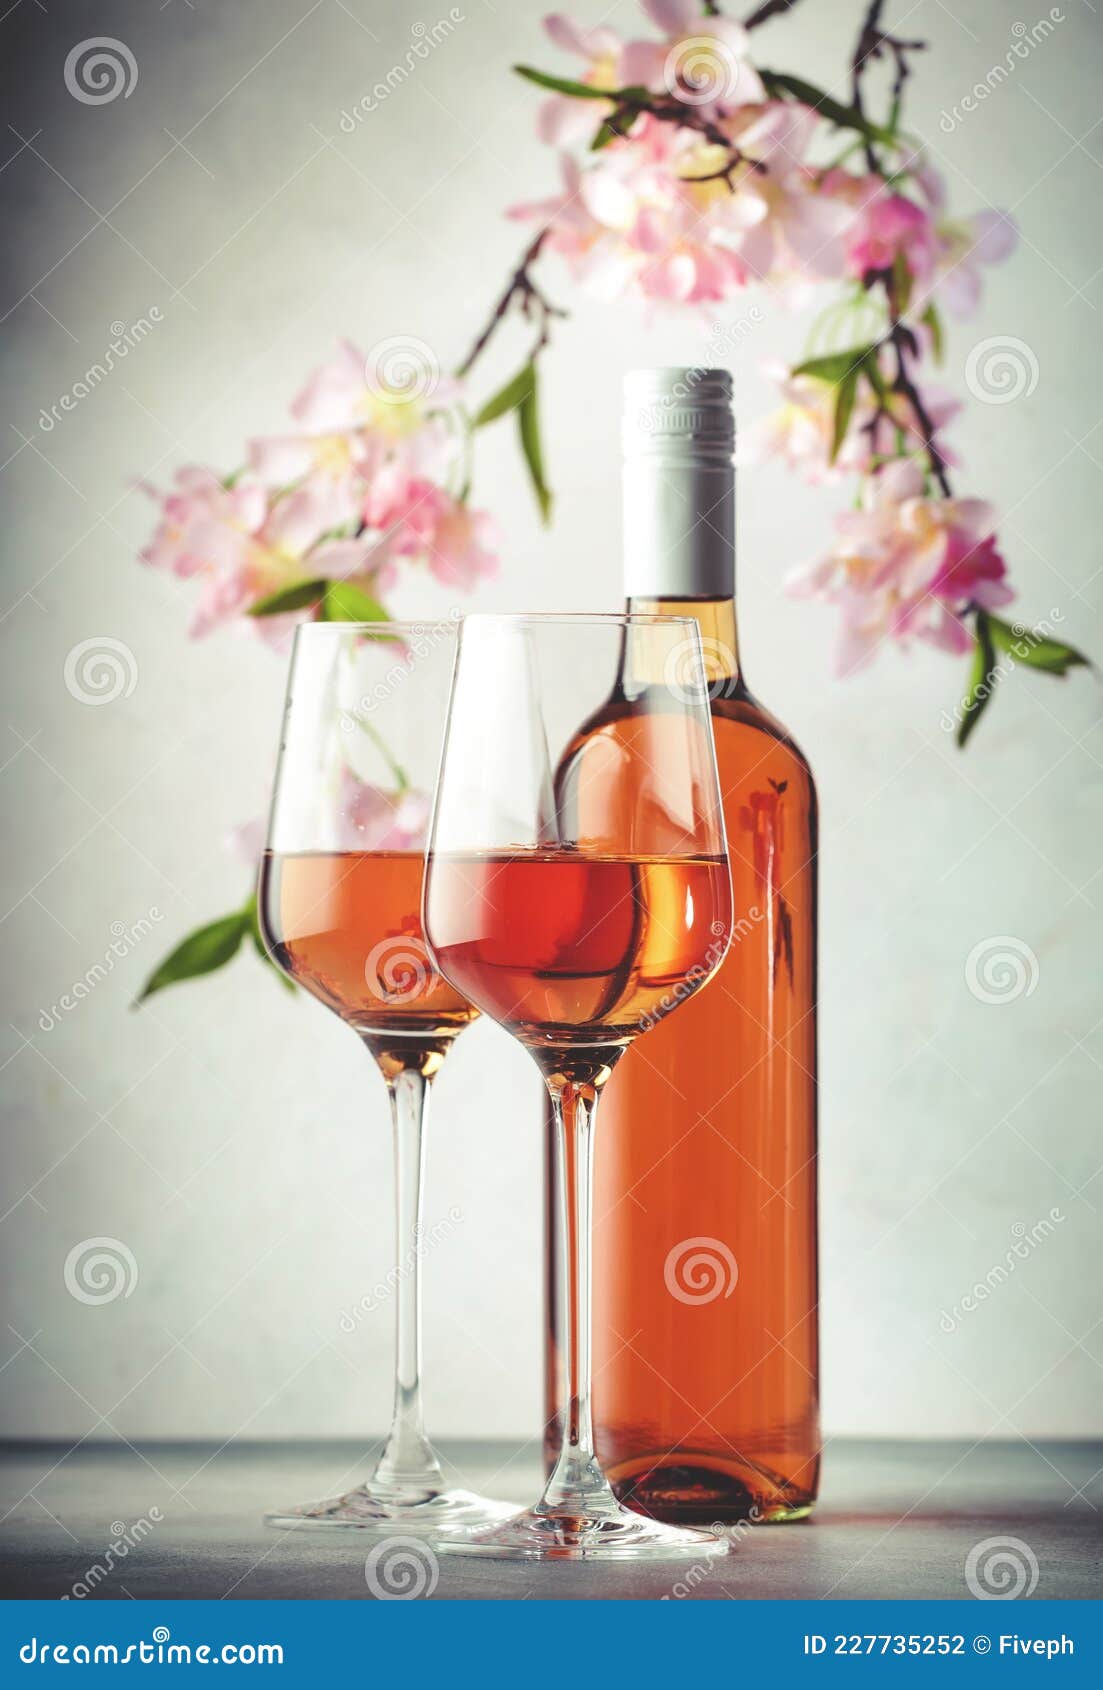 rose wine glass and bottle on the gray table and pink flowers. rosado, rosato or blush wine tasting